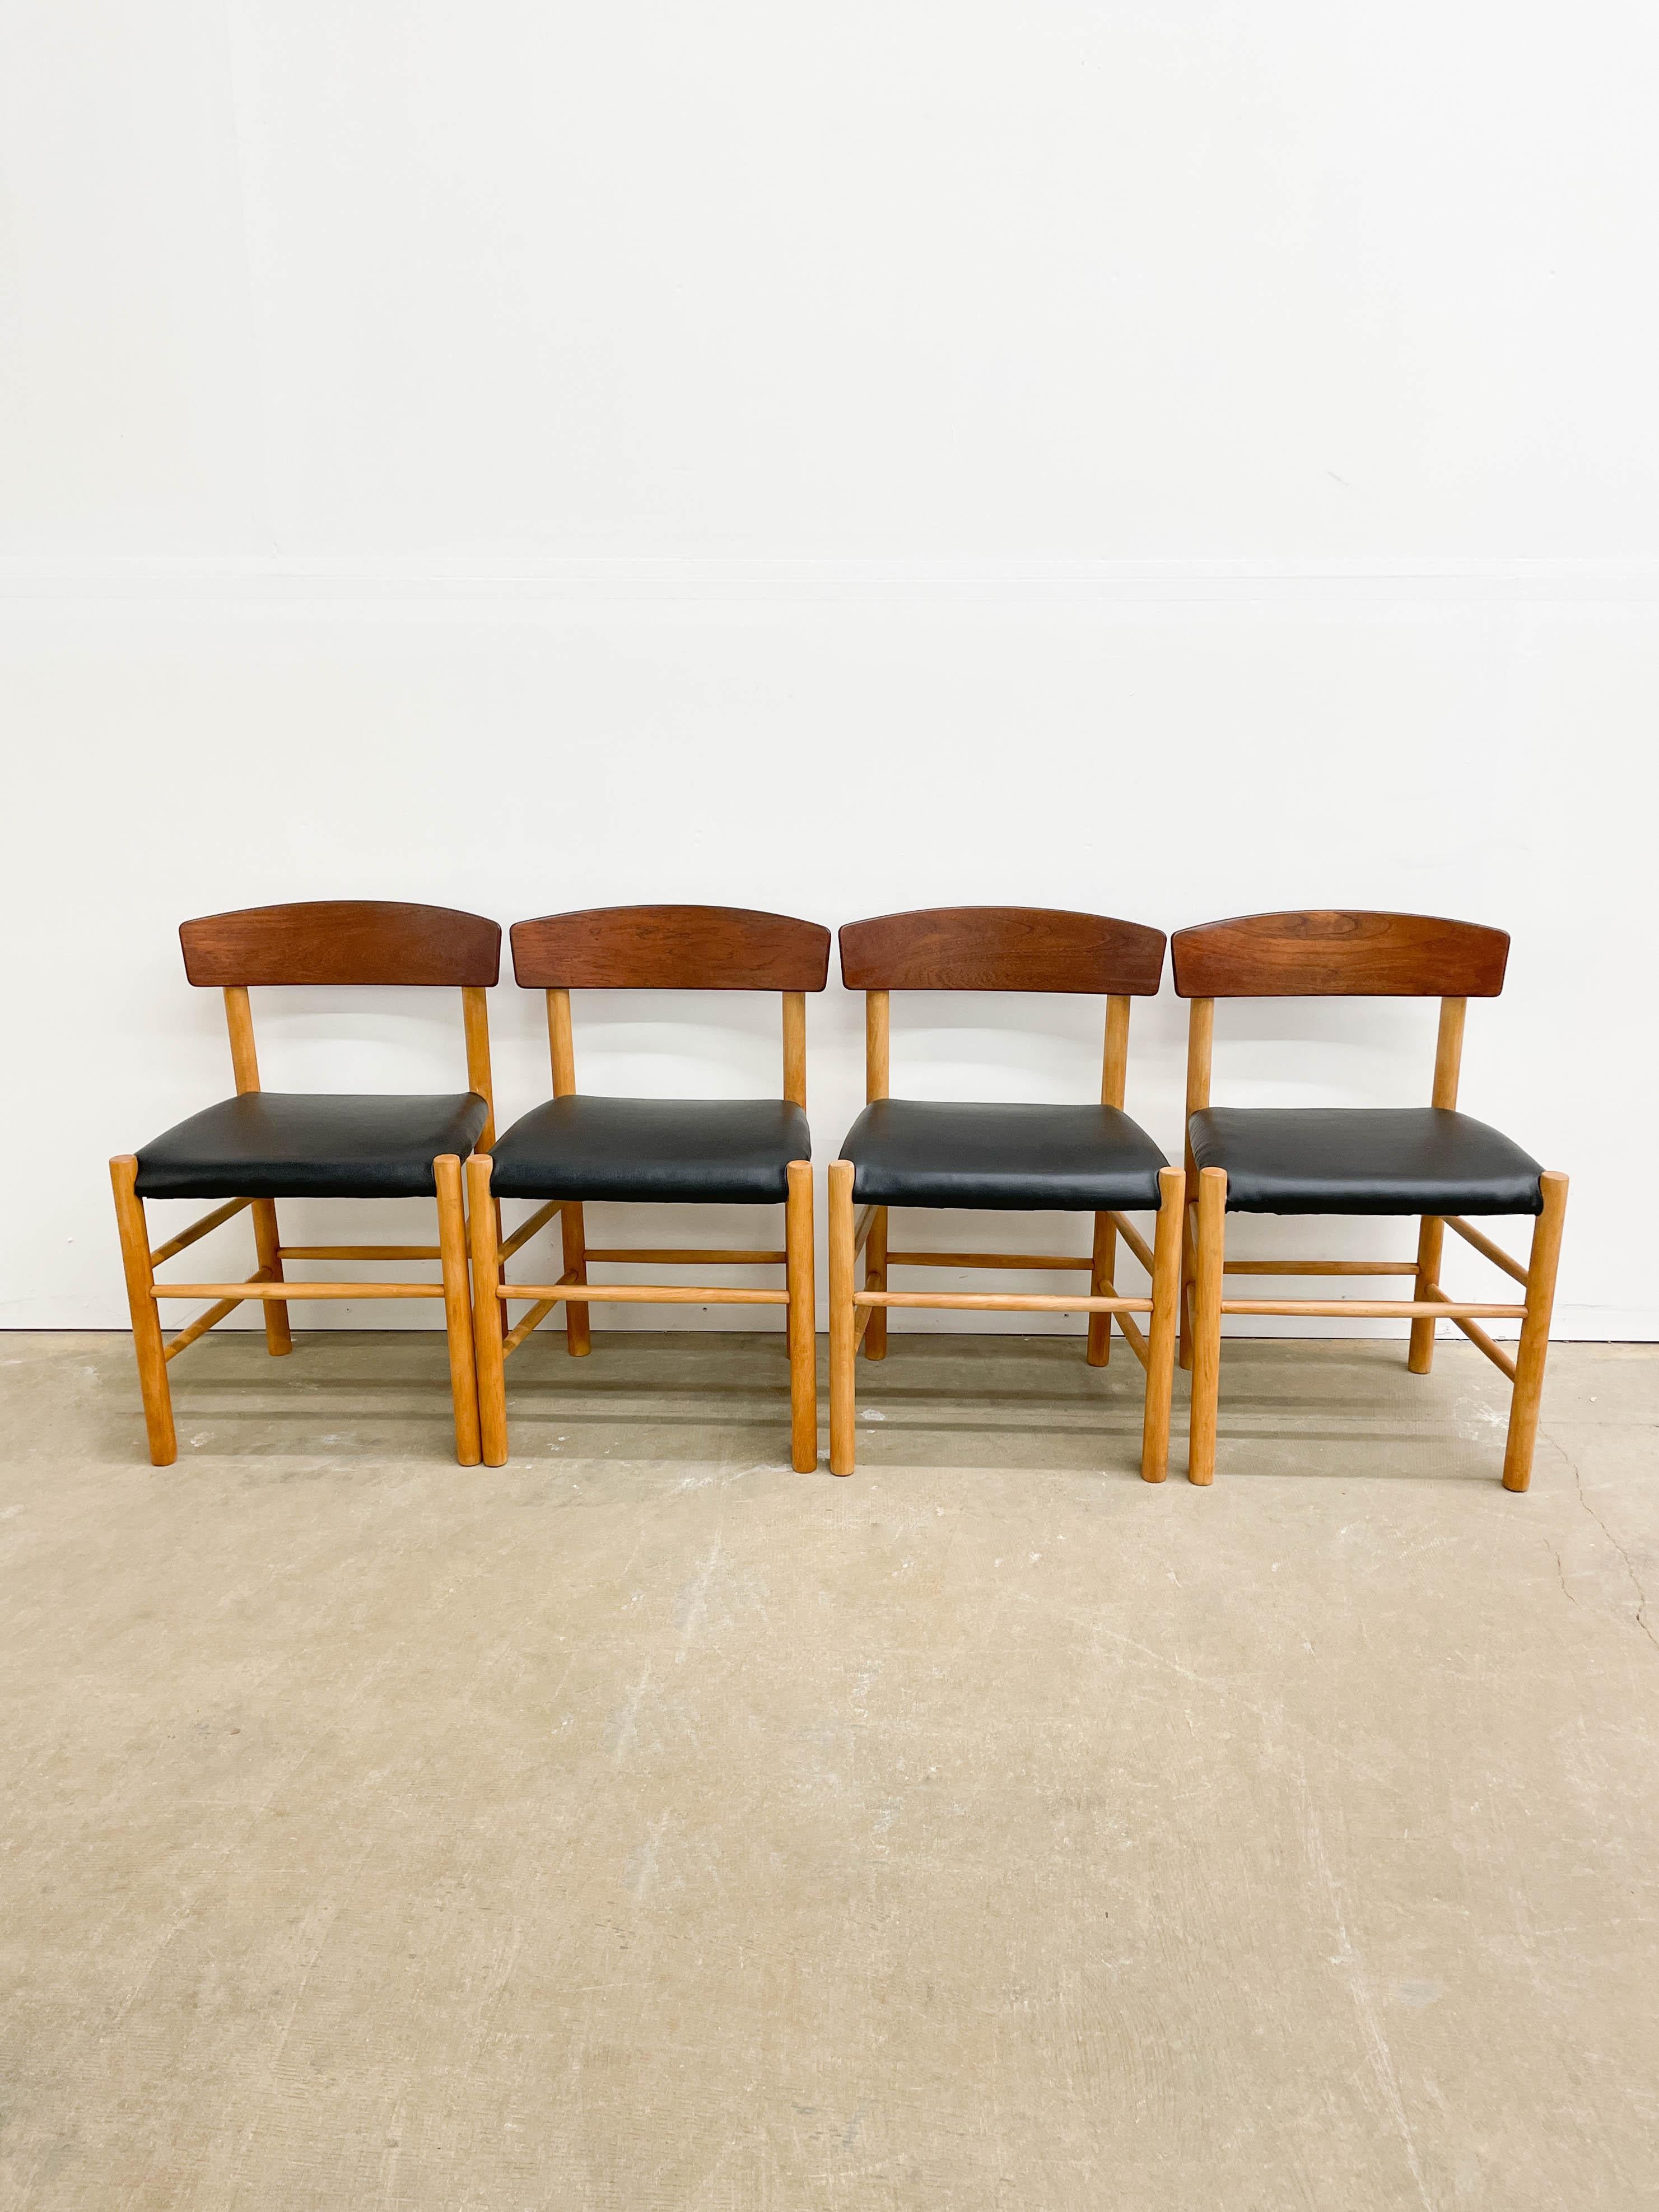 This is a spectacular and rare set of four dining chairs by Danish designer Børge Mogensen in 1947, made by FDB Møbler in the late 1940s. This is an early version of the J39 chairs with solid beech frames and steam-bent teak seat backs. They come